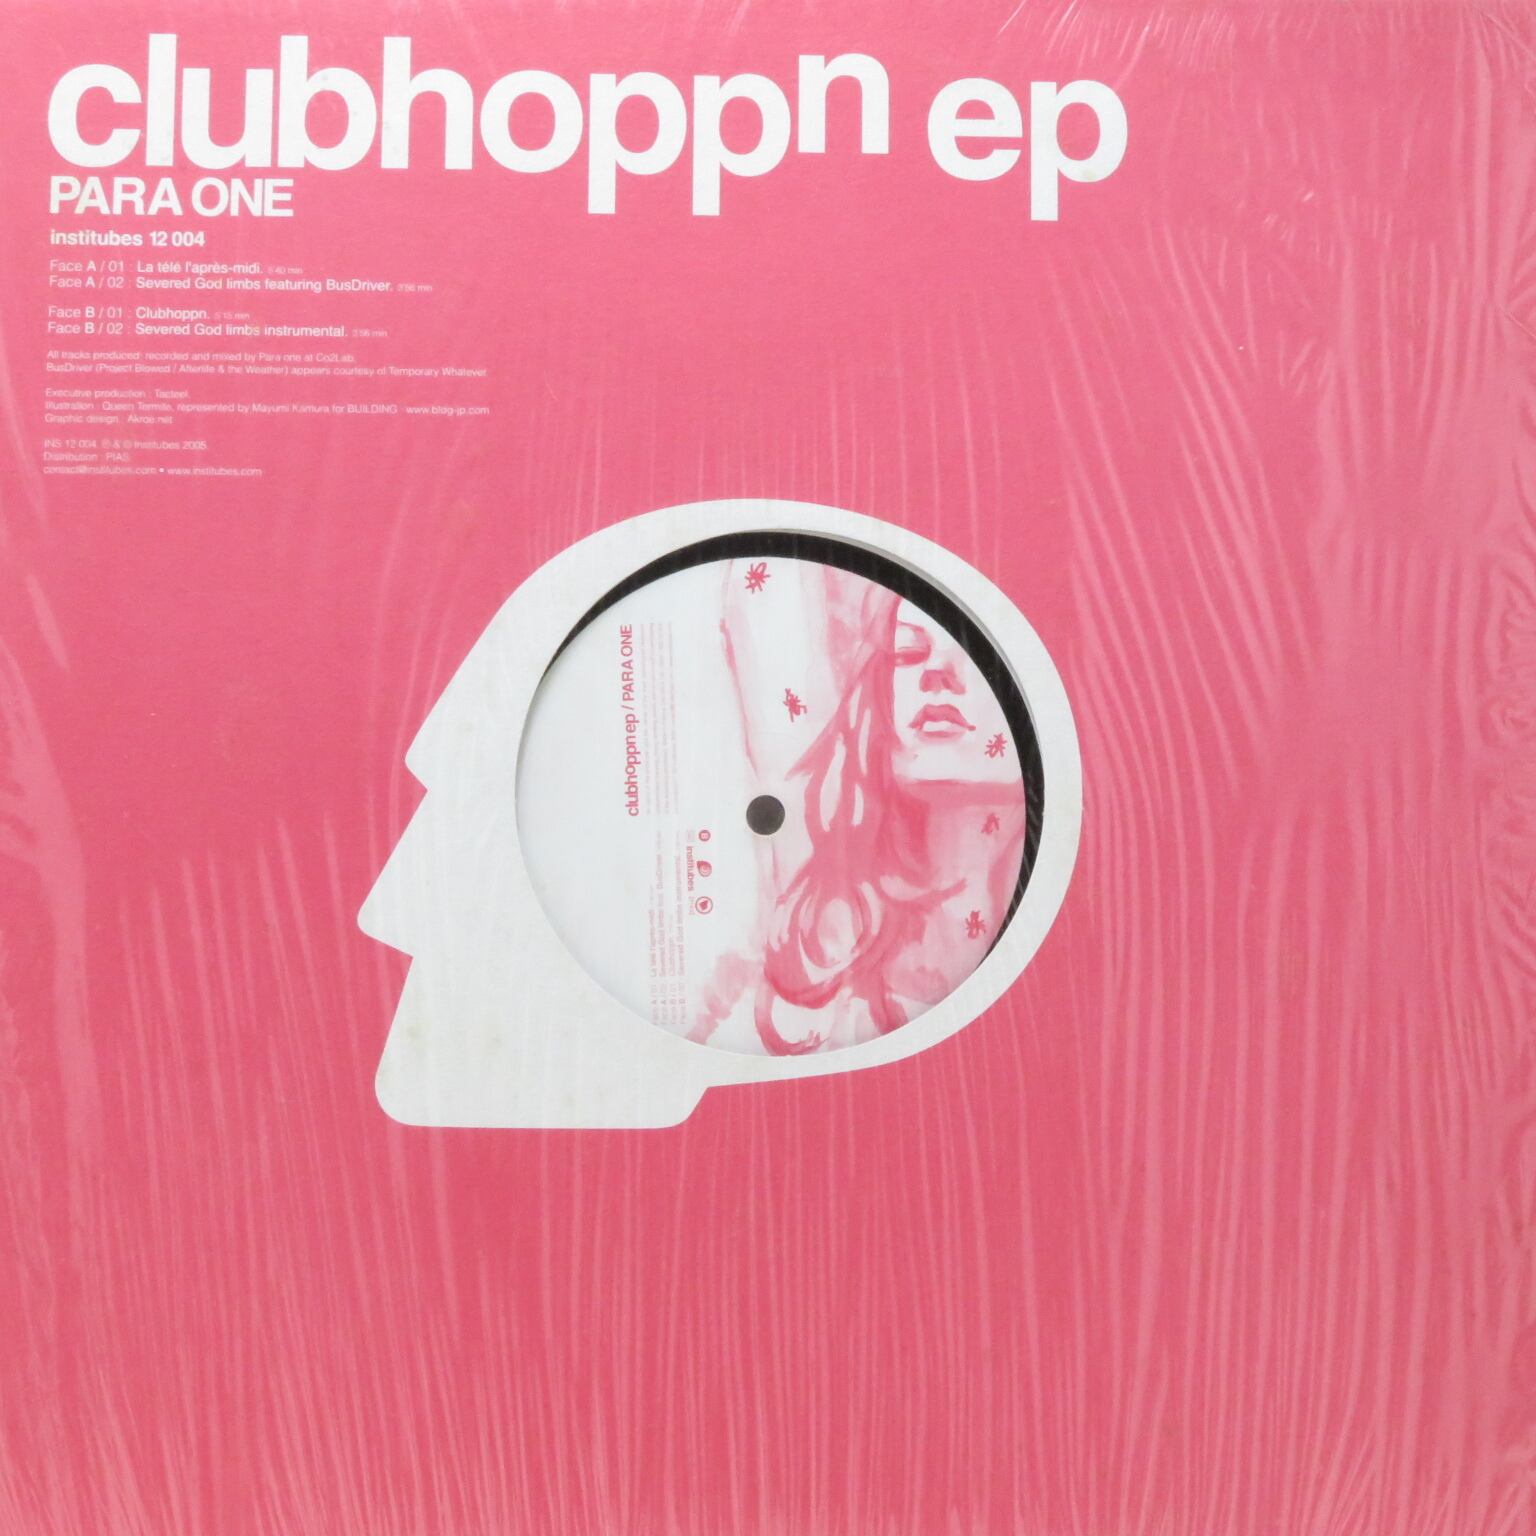 Para One / Clubhoppn EP [ins12004] - 画像2